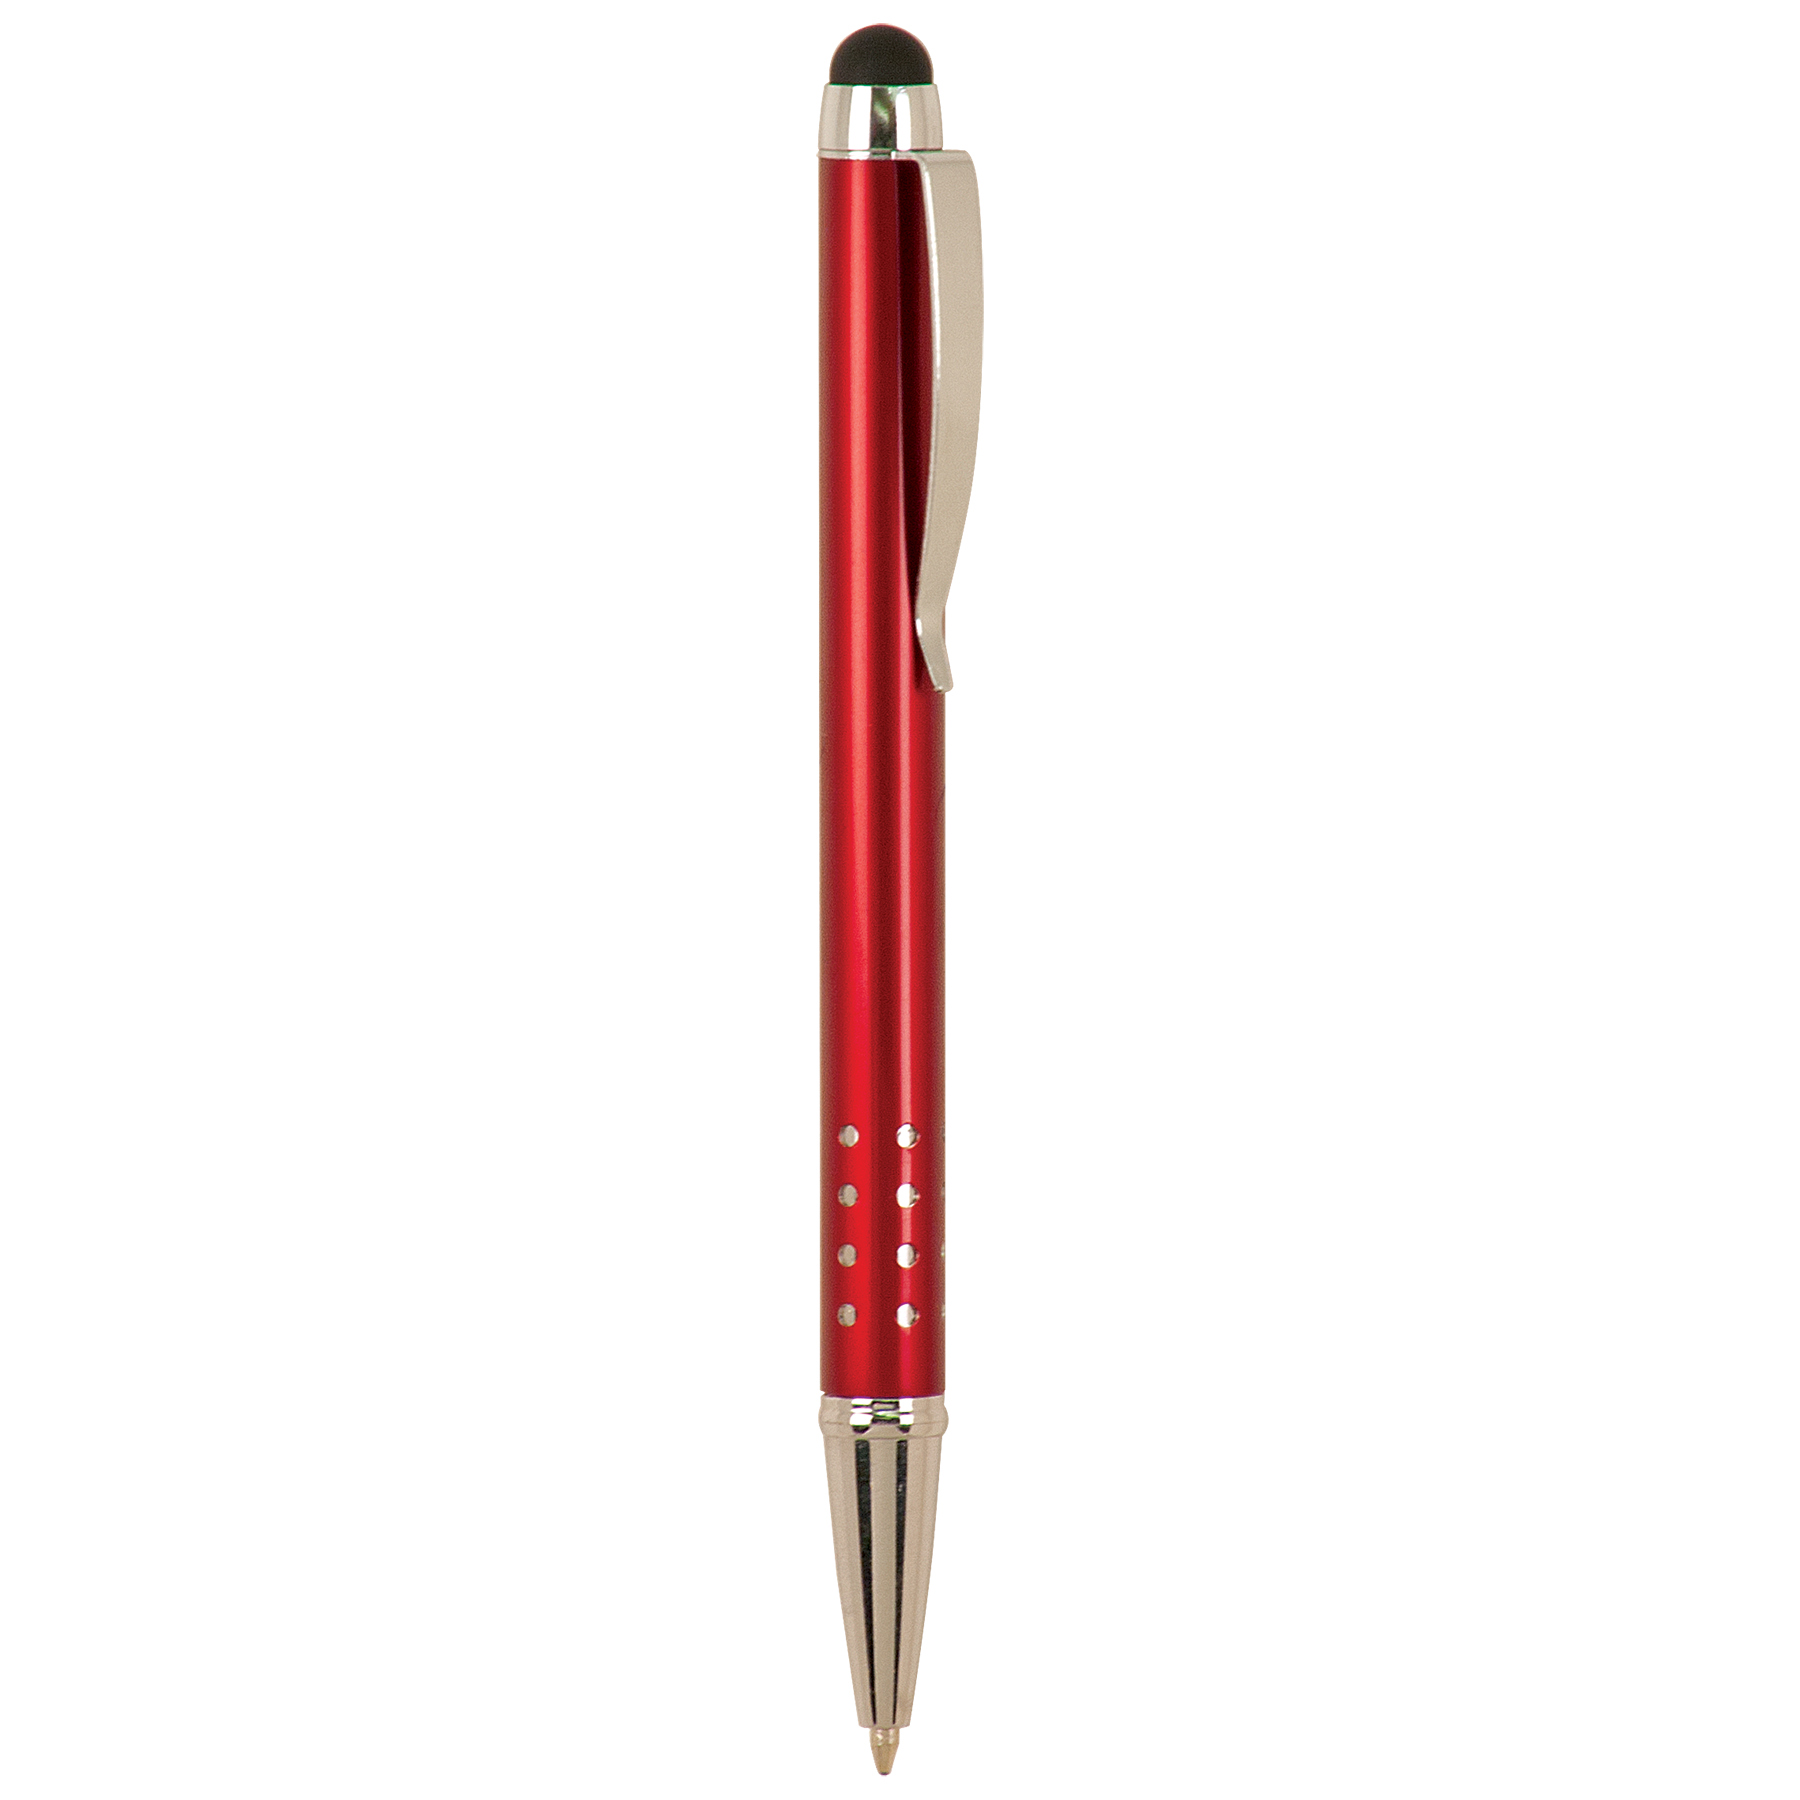 Silver Trim Laserable Pen with Stylus